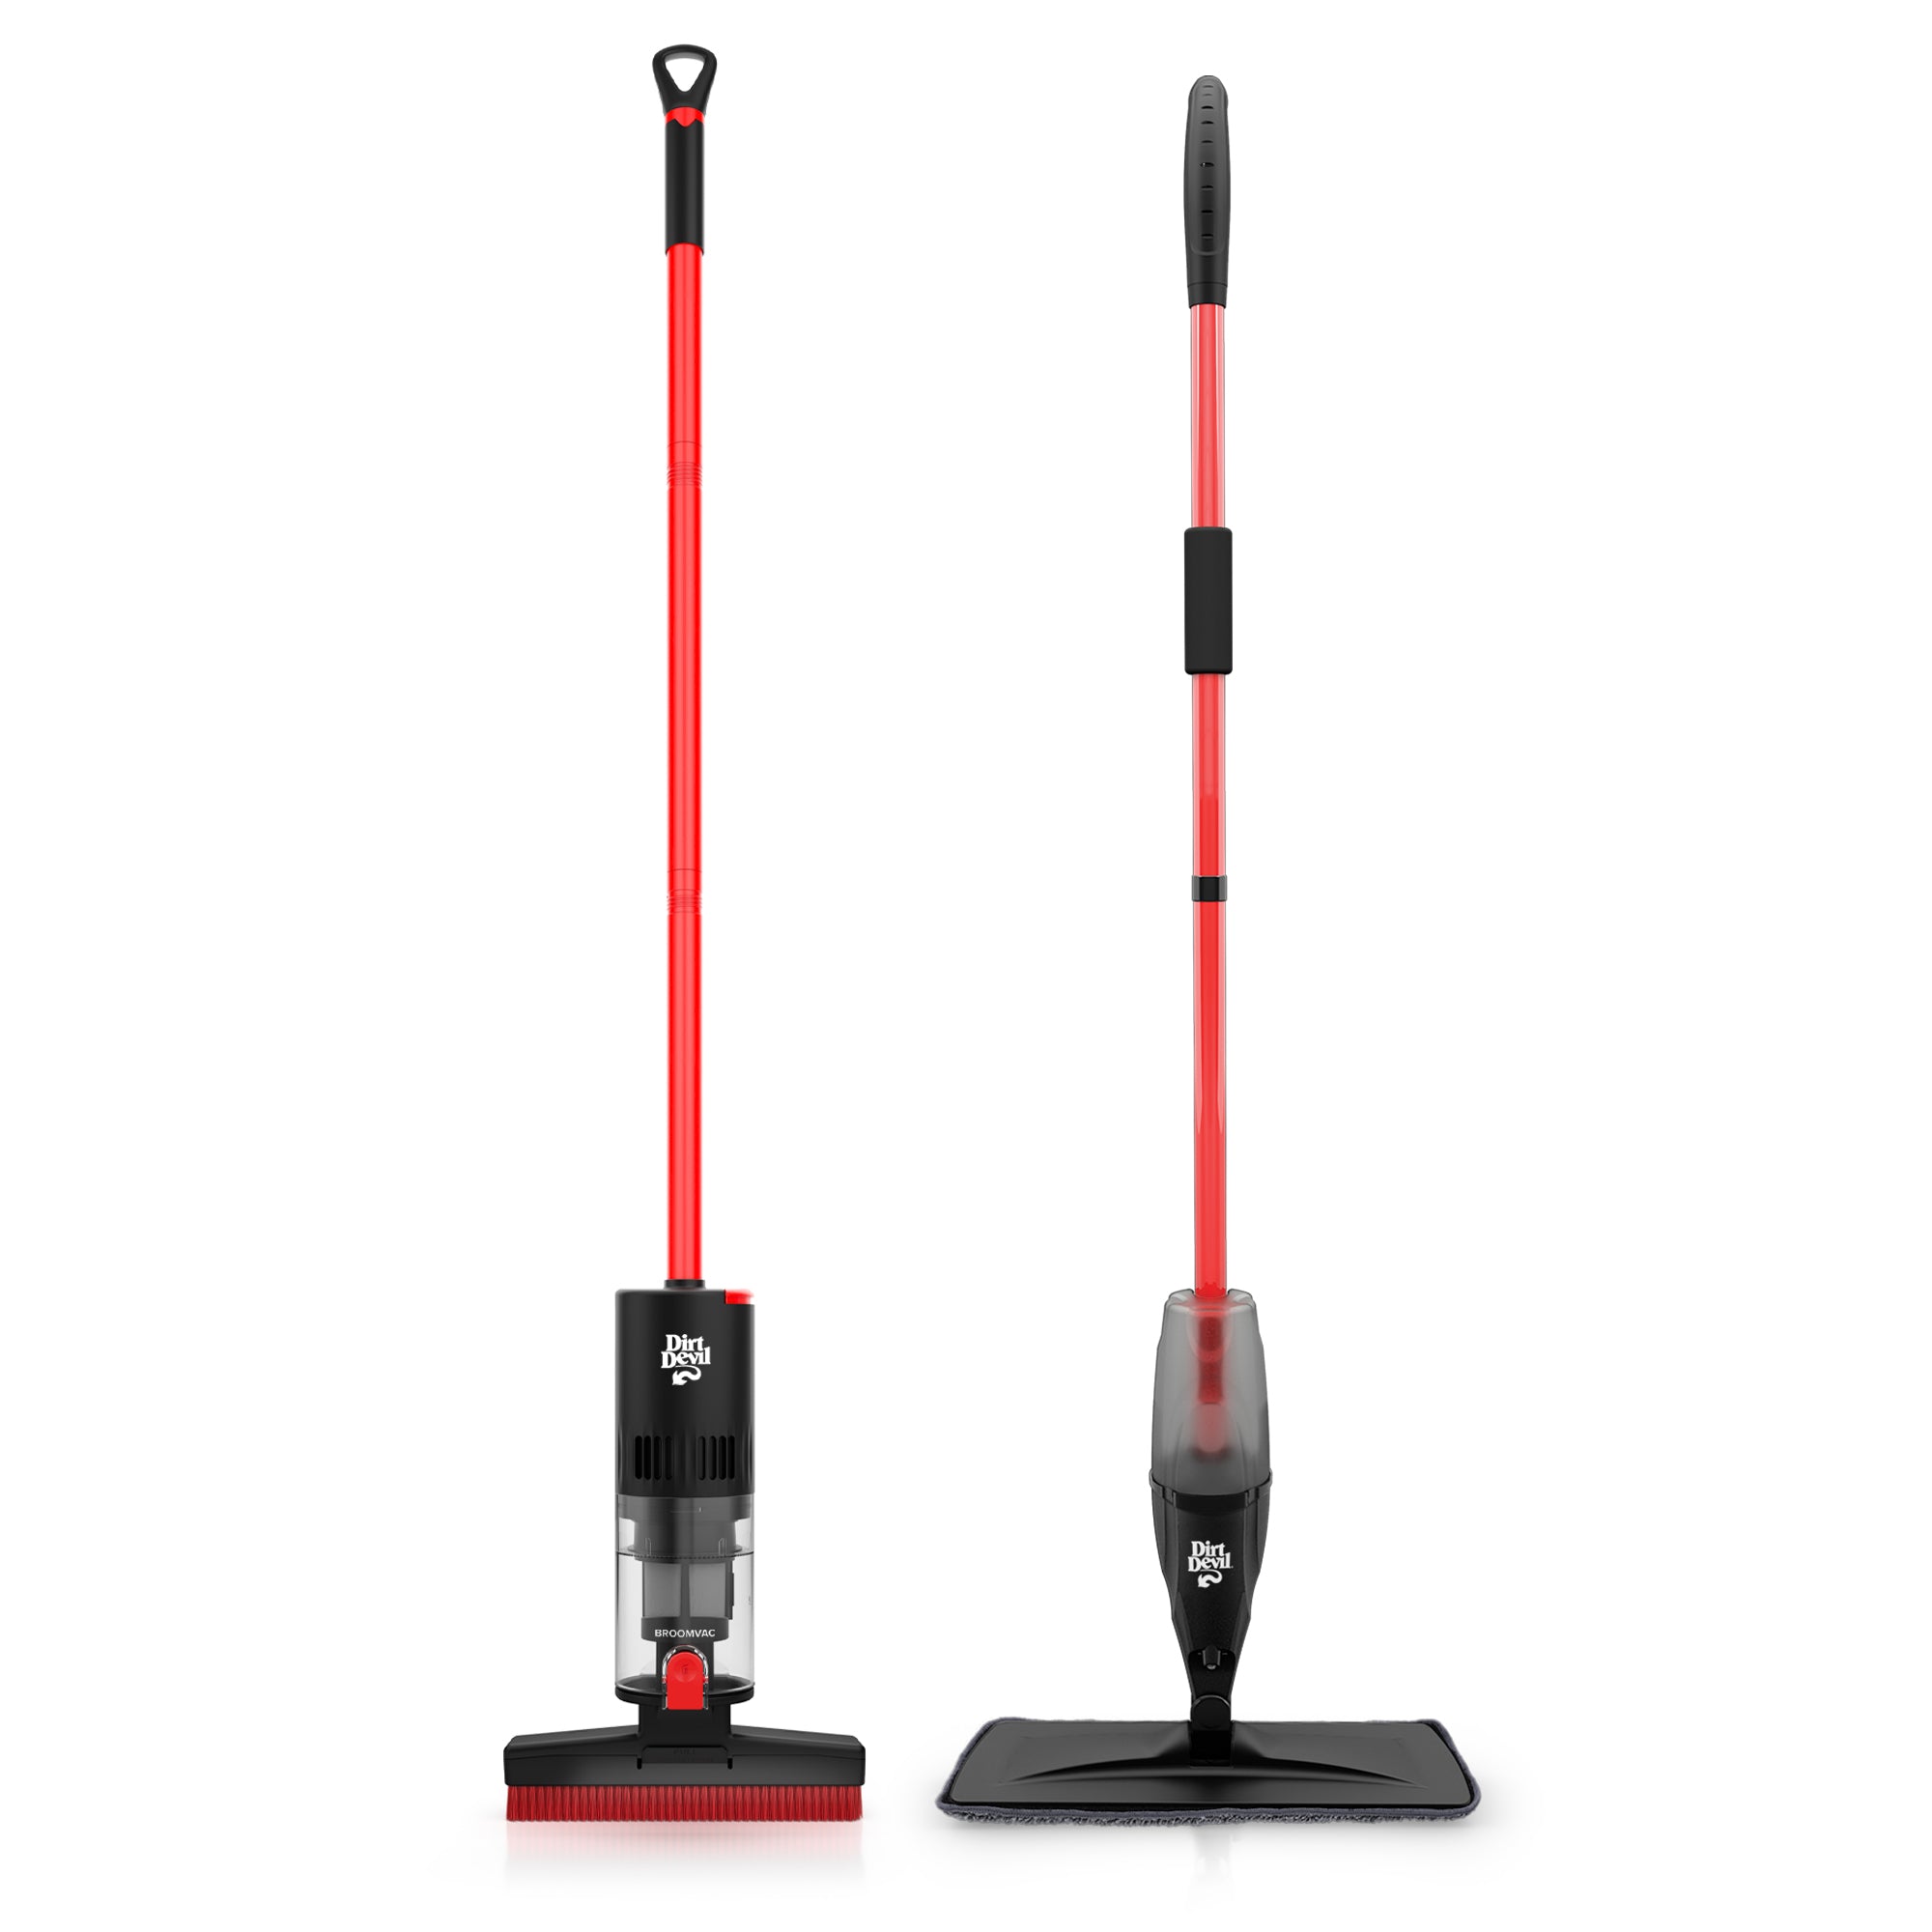 This Best-Selling Spray Mop Is on Sale for $20 at